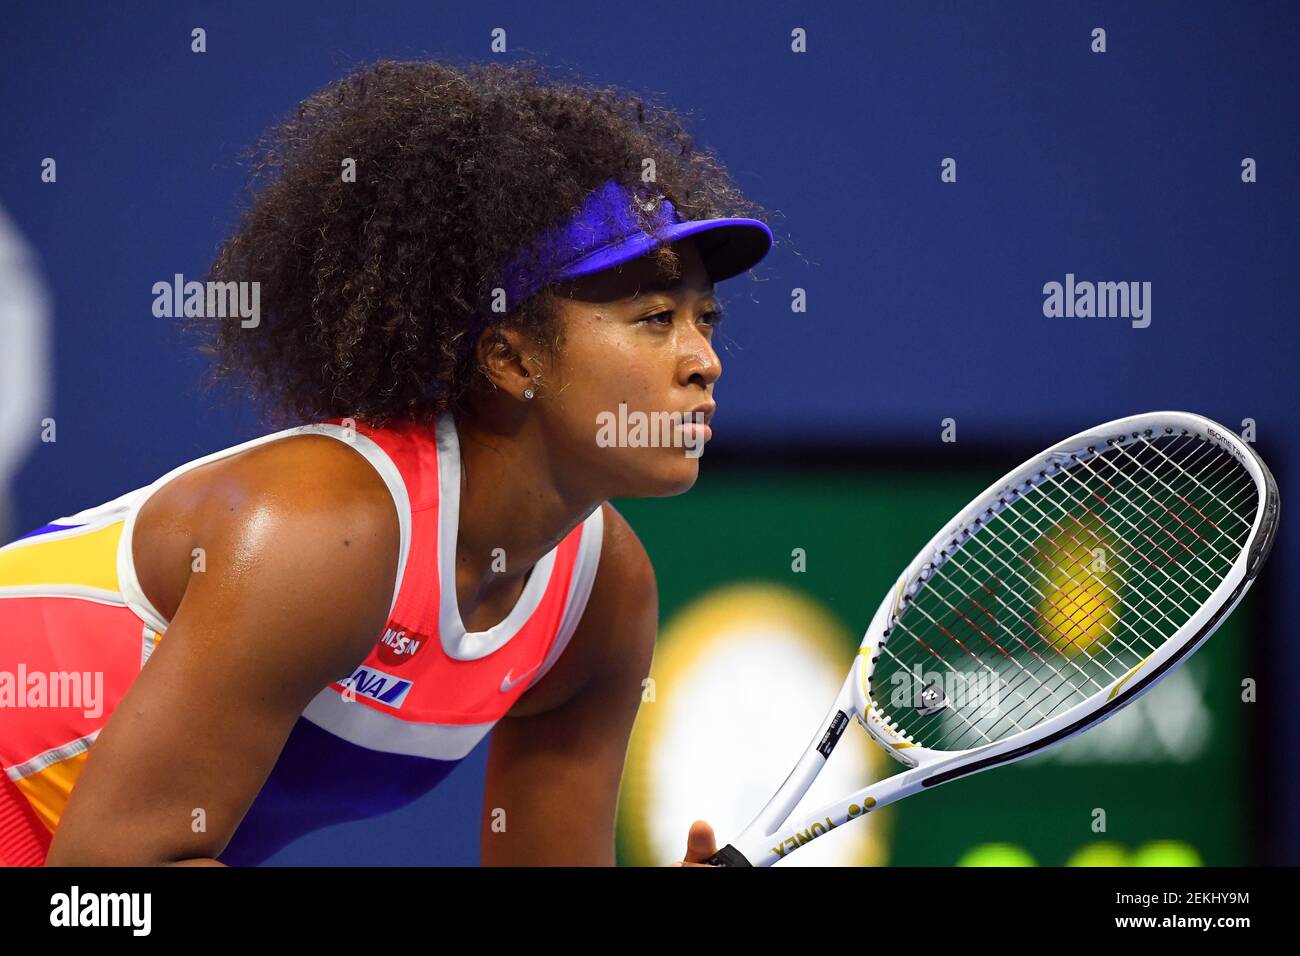 Sep 10, 2020; Flushing Meadows, New York, USA; Naomi Osaka of Japan readies for the serve from Jennifer Brady of the United States in the women's singles semifinals match on day eleven of the 2020 U.S. Open tennis tournament at USTA Billie Jean King National Tennis Center. Mandatory Credit: Robert Deutsch-USA TODAY Sports/Sipa USA Stock Photo